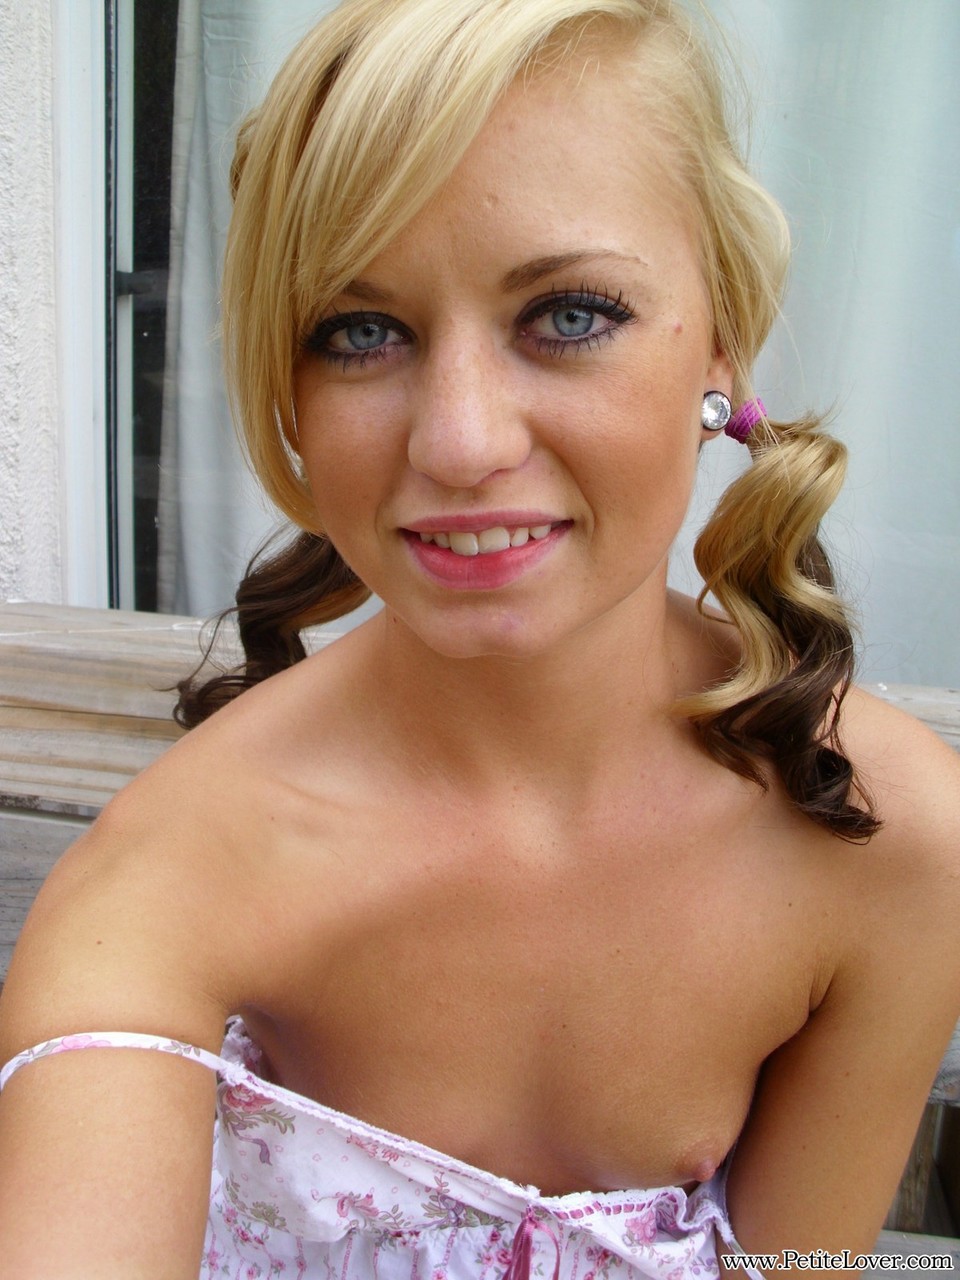 Cute blonde Tiff in pigtails showing off her wee small tits & tiny bald pussy porno foto #428478640 | Petite Lover Pics, Tiff, Amateur, mobiele porno